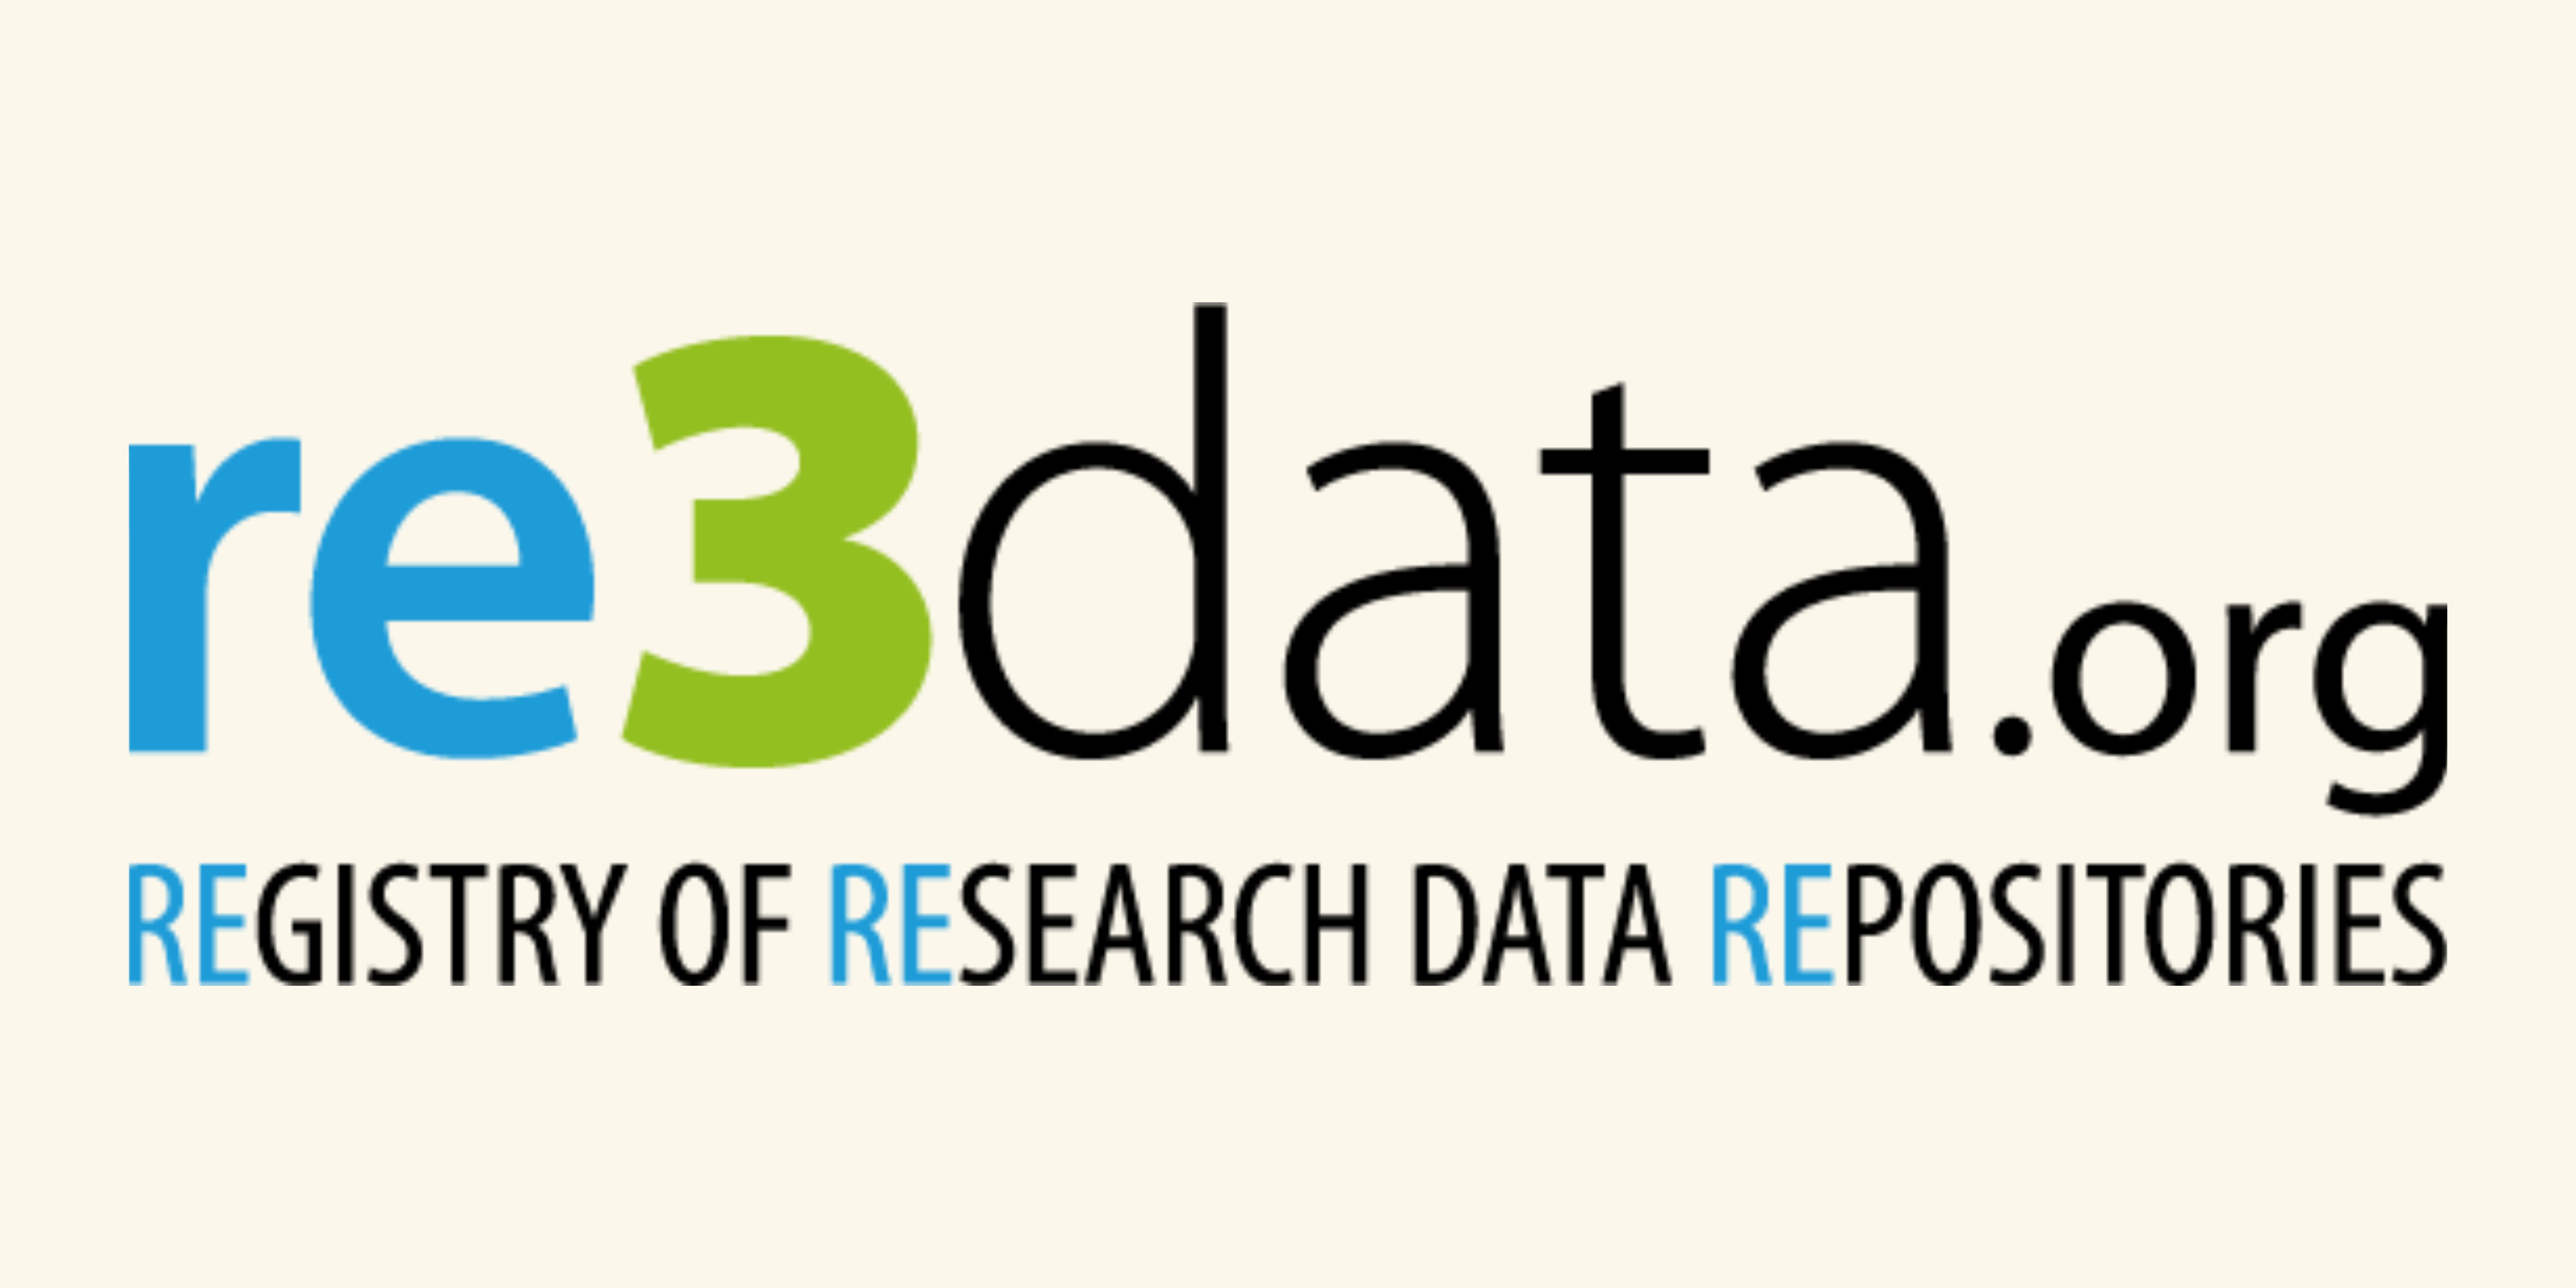 Registry of Research Data Repositories